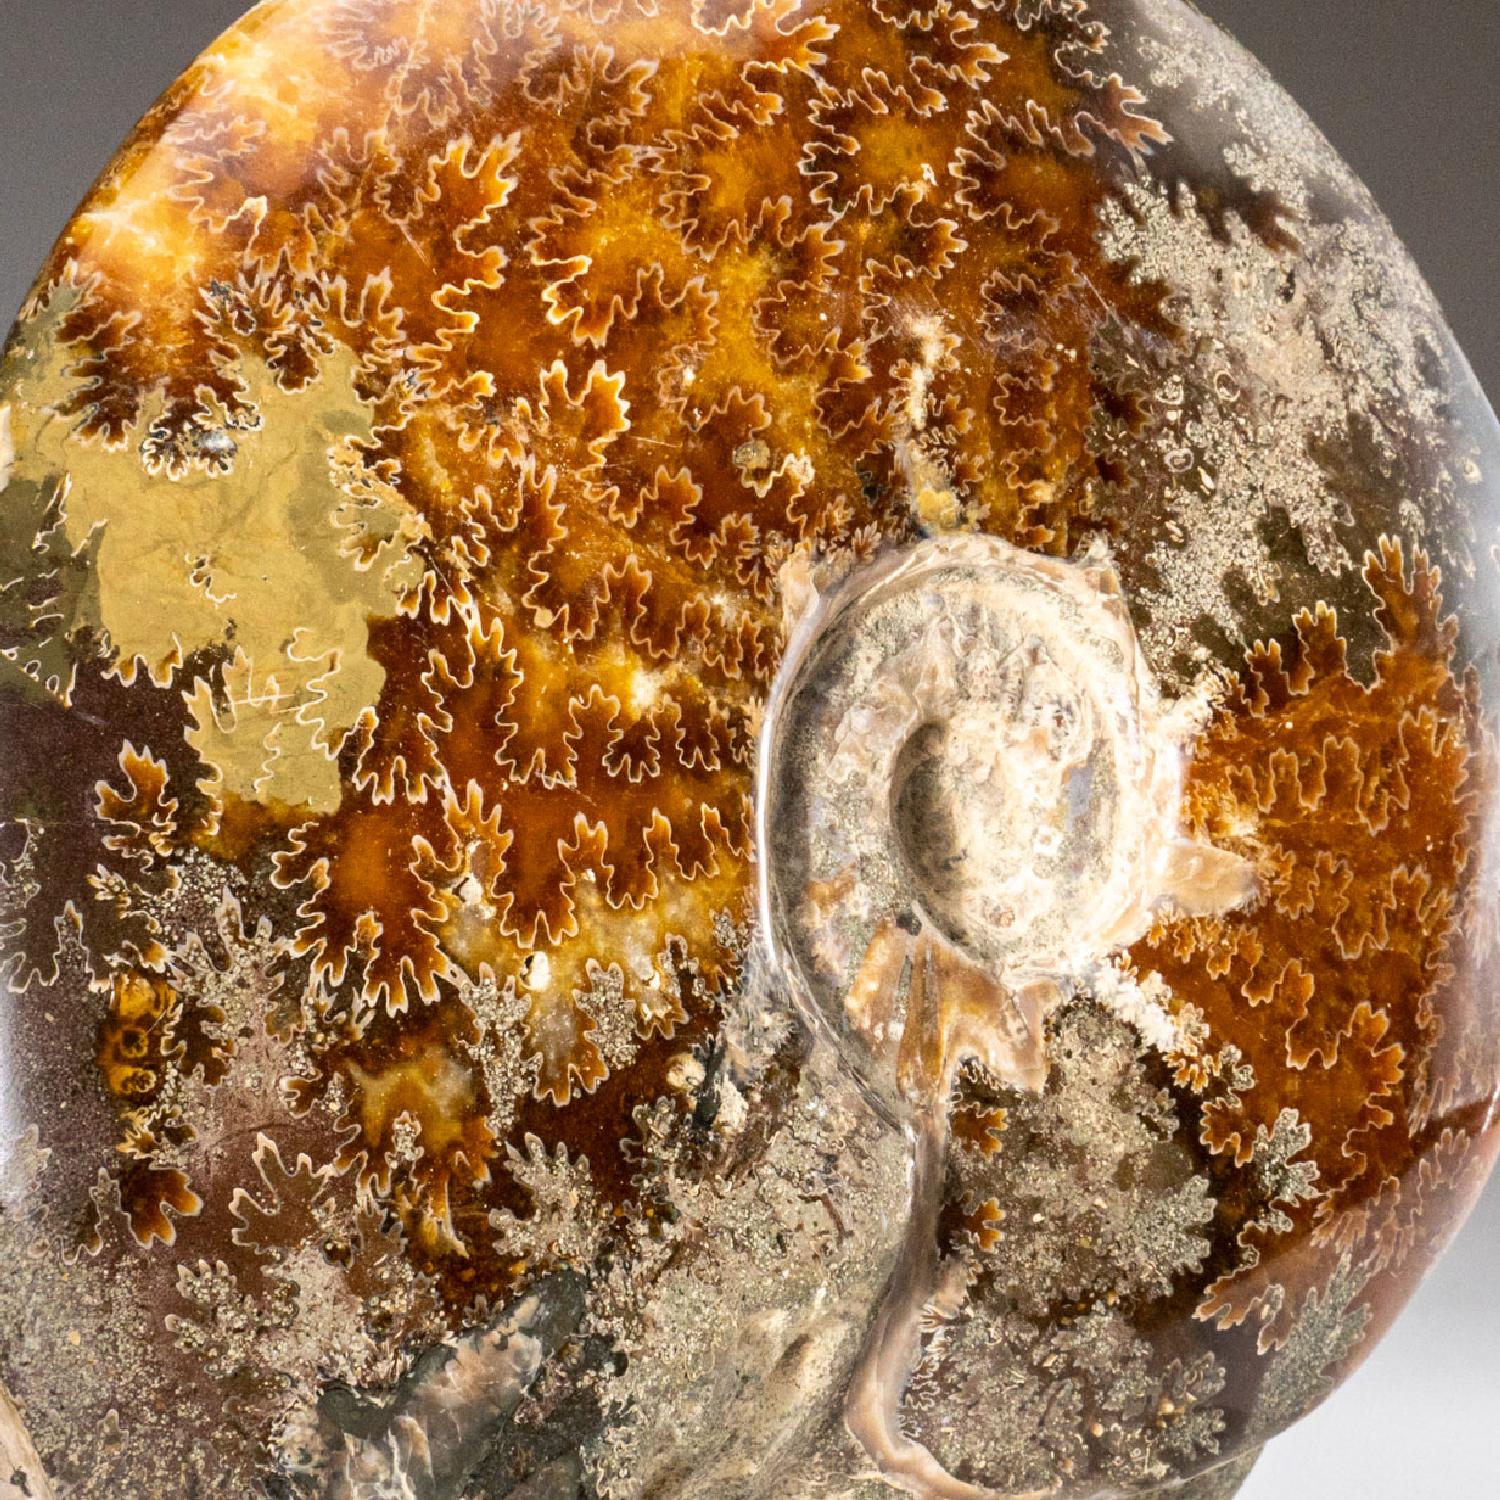 A beautiful, fossilized and calcified ammonite shell with an iridescent, opalized shimmer, displaying hints of vibrant red and yellow tones. This specimen displays multiple complete ammonites in a clustered form, each having a dendritic crystal